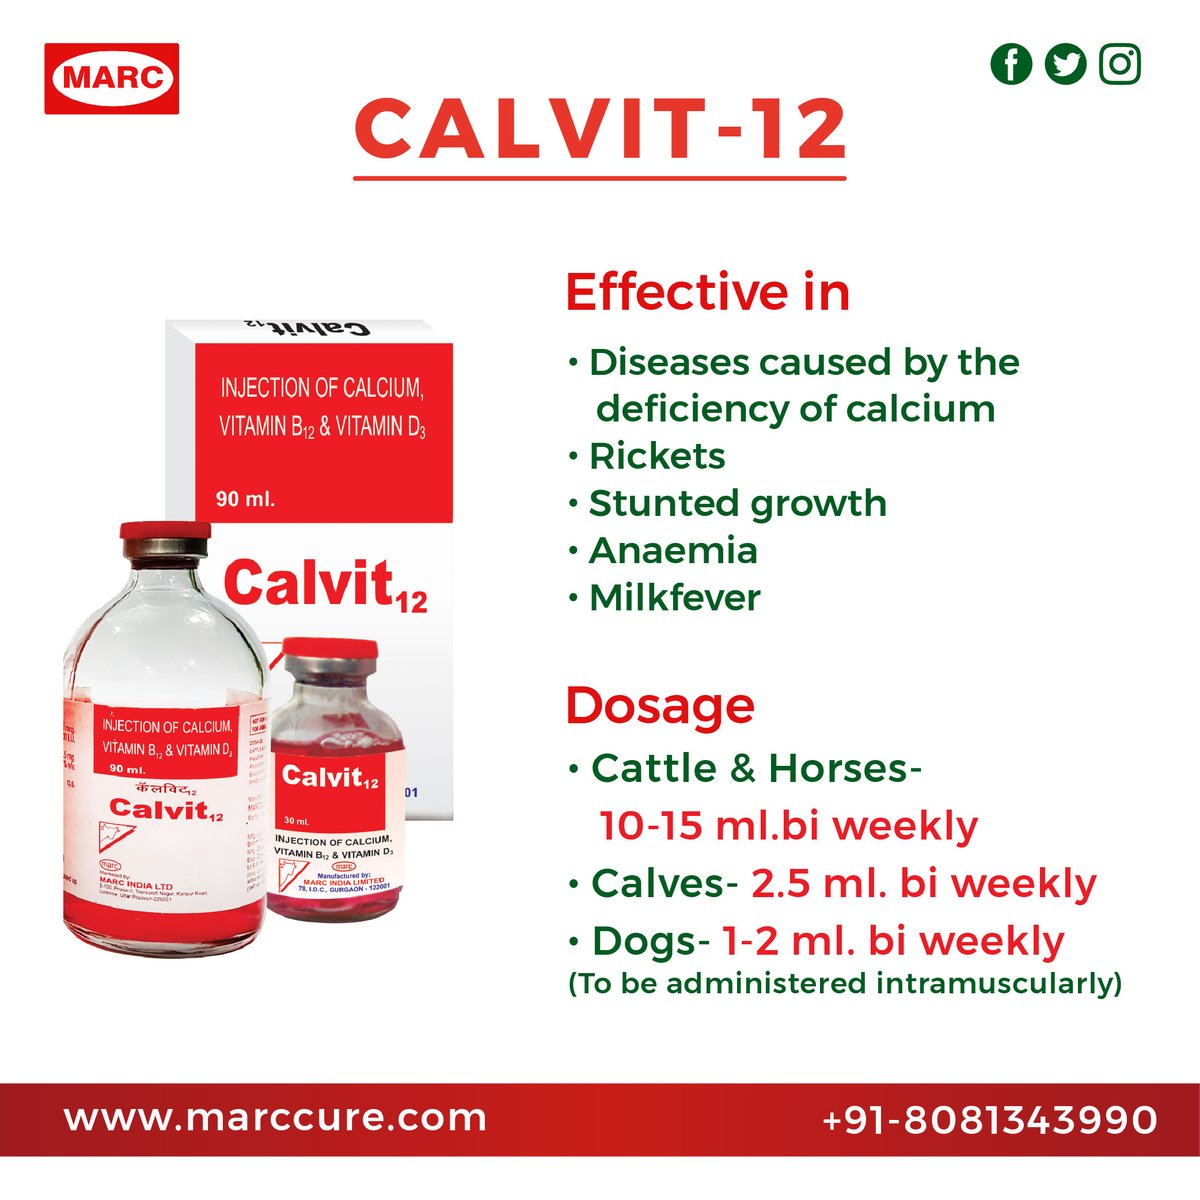 Marc India ltd | Veterinary medicine manufacturer in India since 1985
#Improvemuscle #Improve_muscle  #osteoporosis #calcium #calciumsupplements #calciumdeficiency #metabolism #rapidgrowth #rapid_growth #RAPIDGROWTH #calvit12 #calvit12inj #calvit12injection #calvit12_injetion